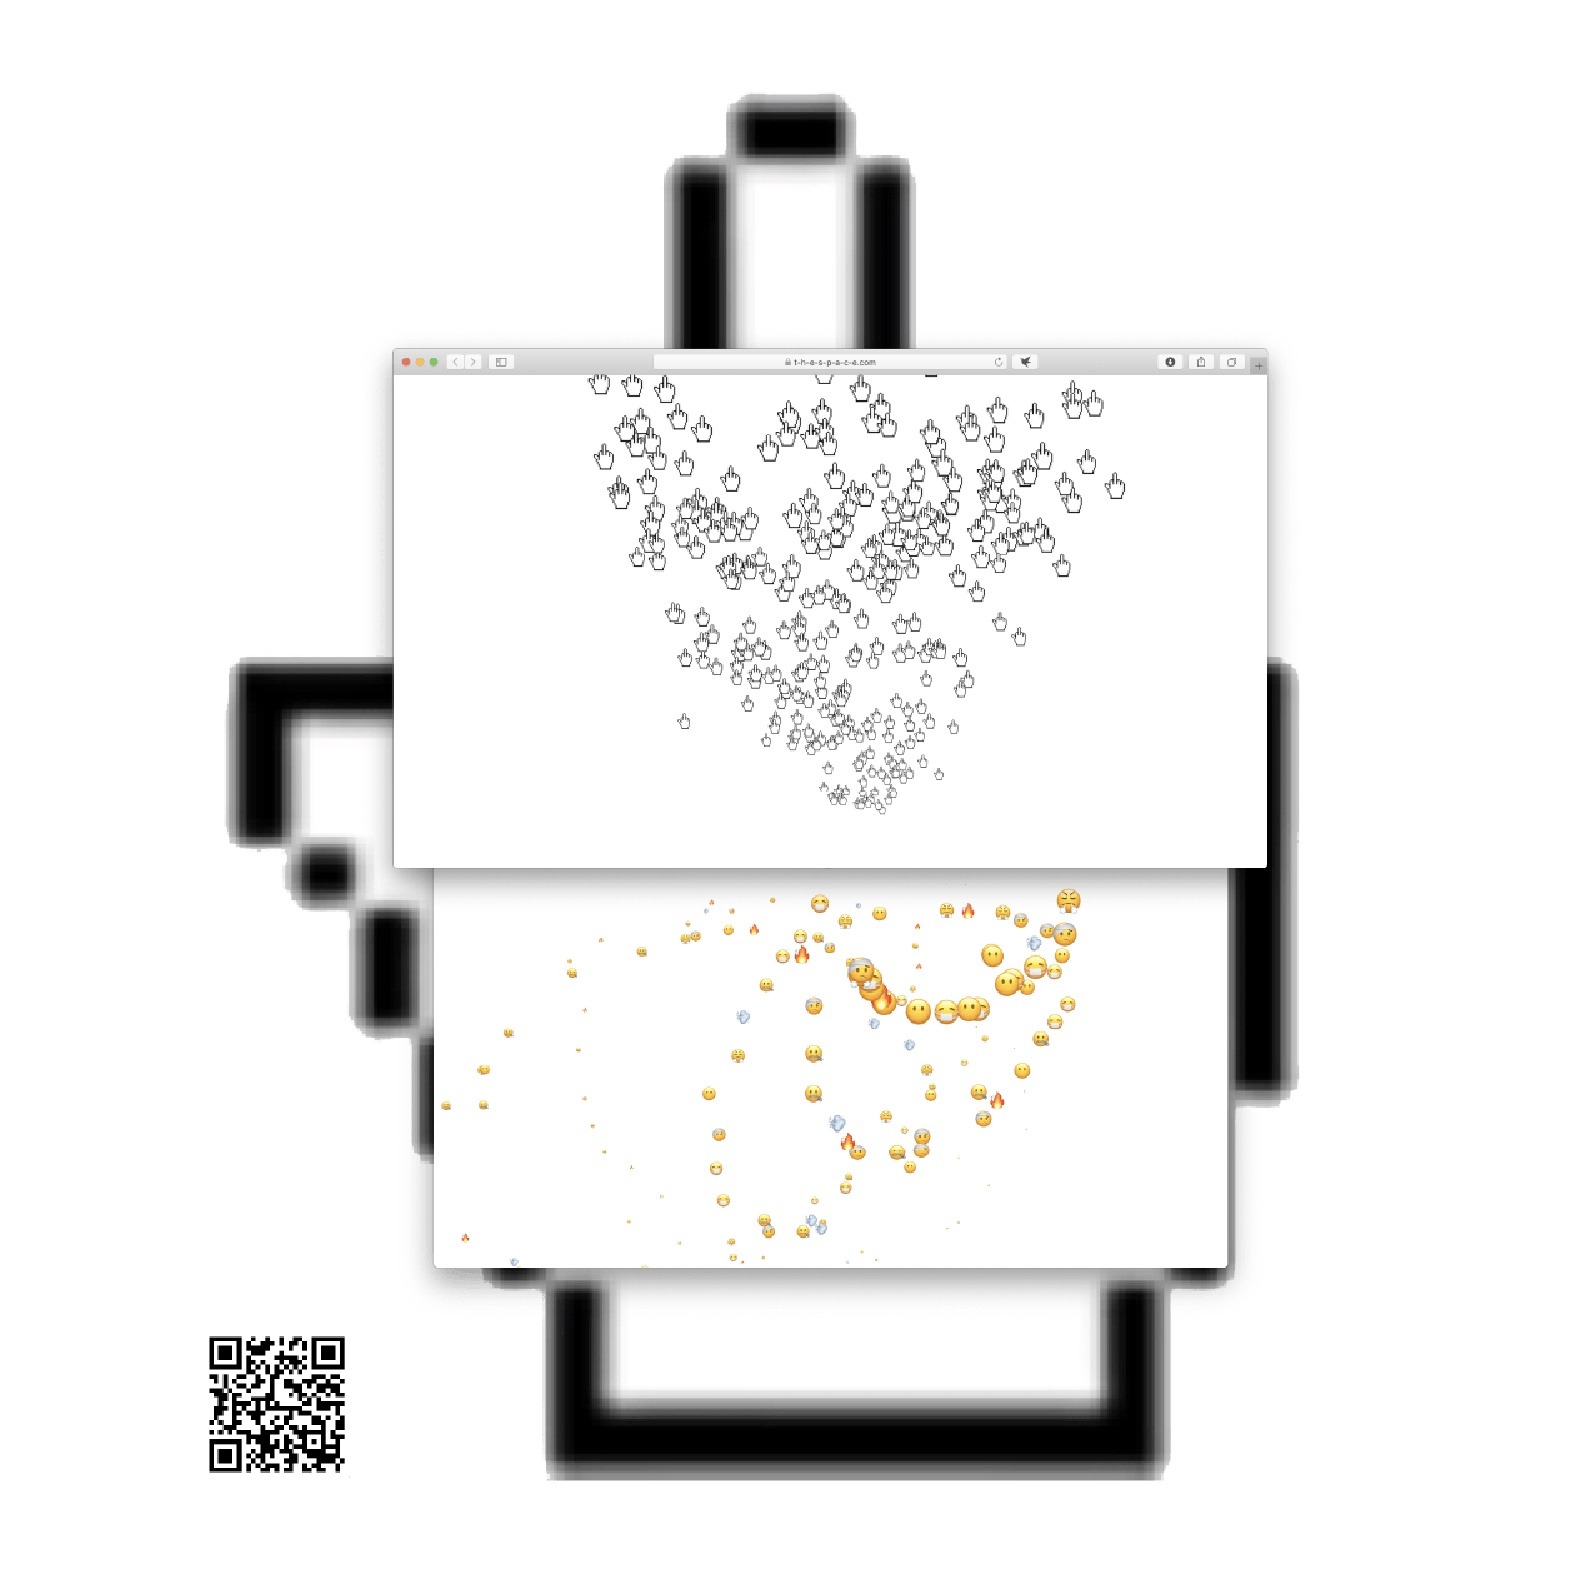 About the Artwork Aaajiao. Protester:cursor:emoji 2019 .website.app  by aaajiao